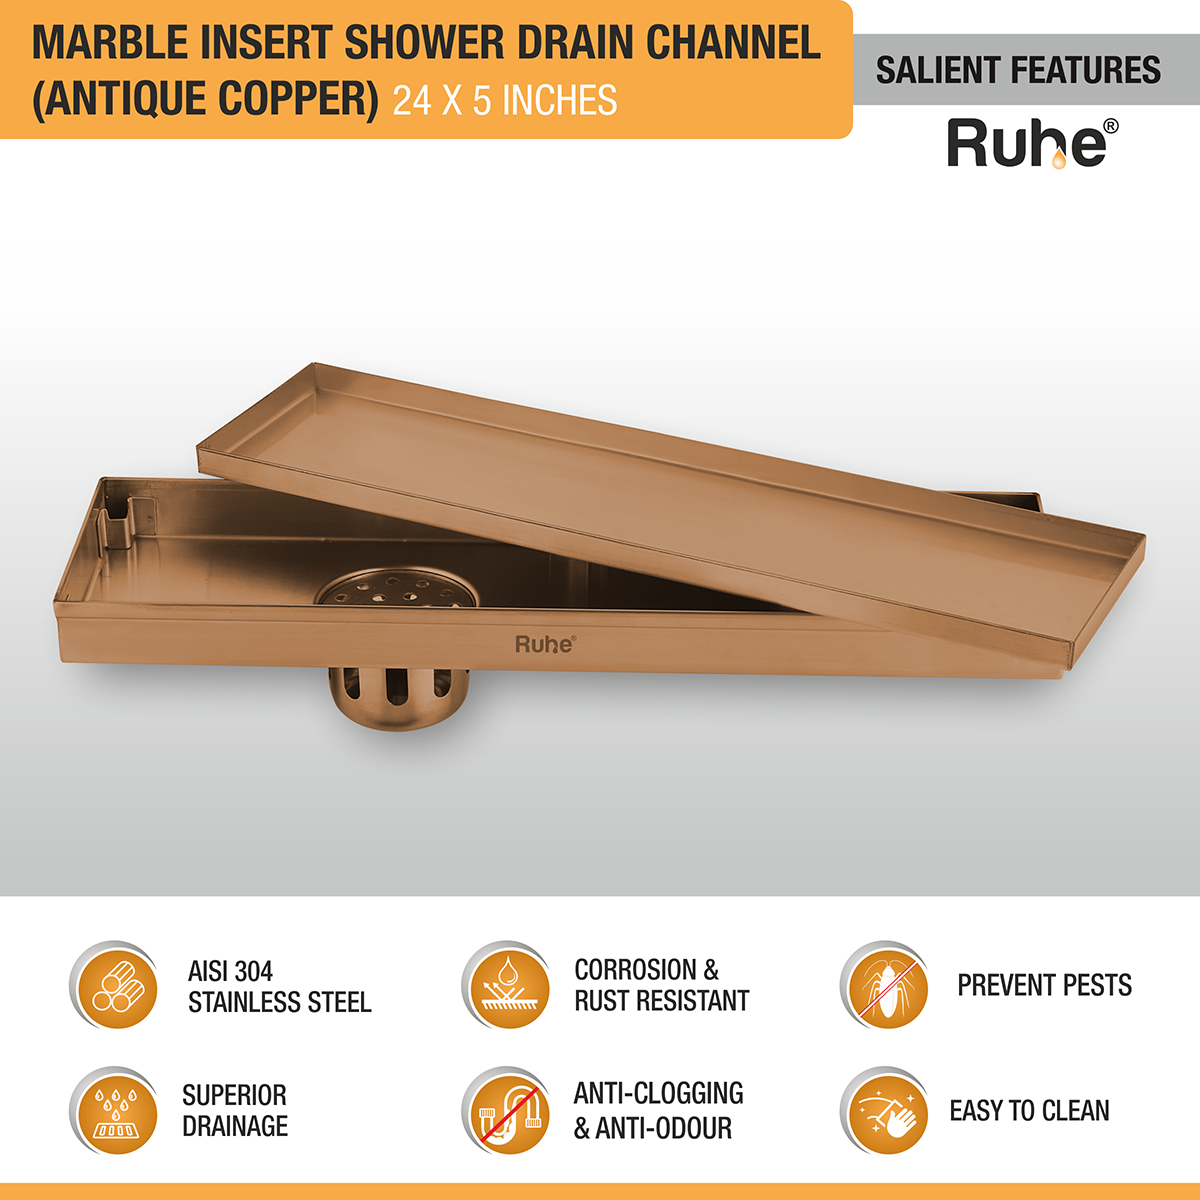 Marble Insert Shower Drain Channel (24 x 5 Inches) ROSE GOLD PVD Coated features and benefits